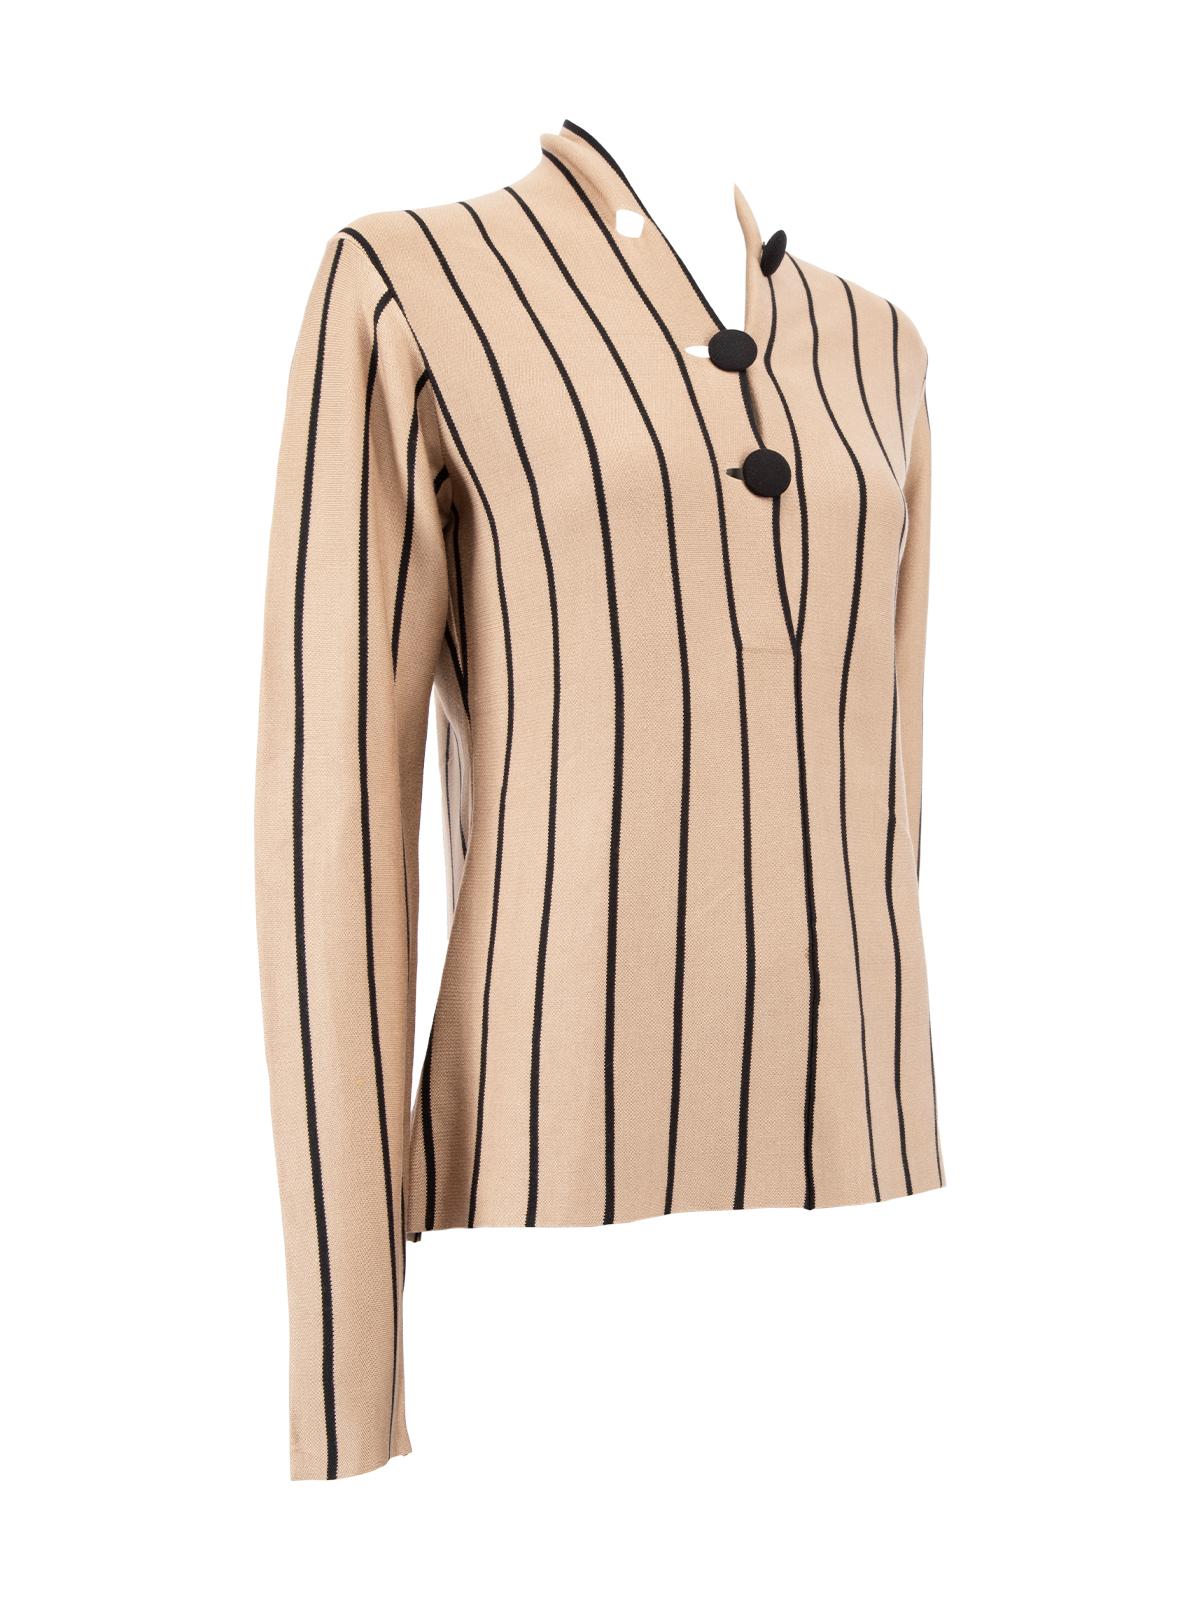 CONDITION is Very good. Minimal wear to top is evident. Minimal mark seen on front of top and minor loose threads seen on this used Balenciaga designer resale item. Details Brown Stripe print Button fastening Long sleeves Pull on V-neckline Made in